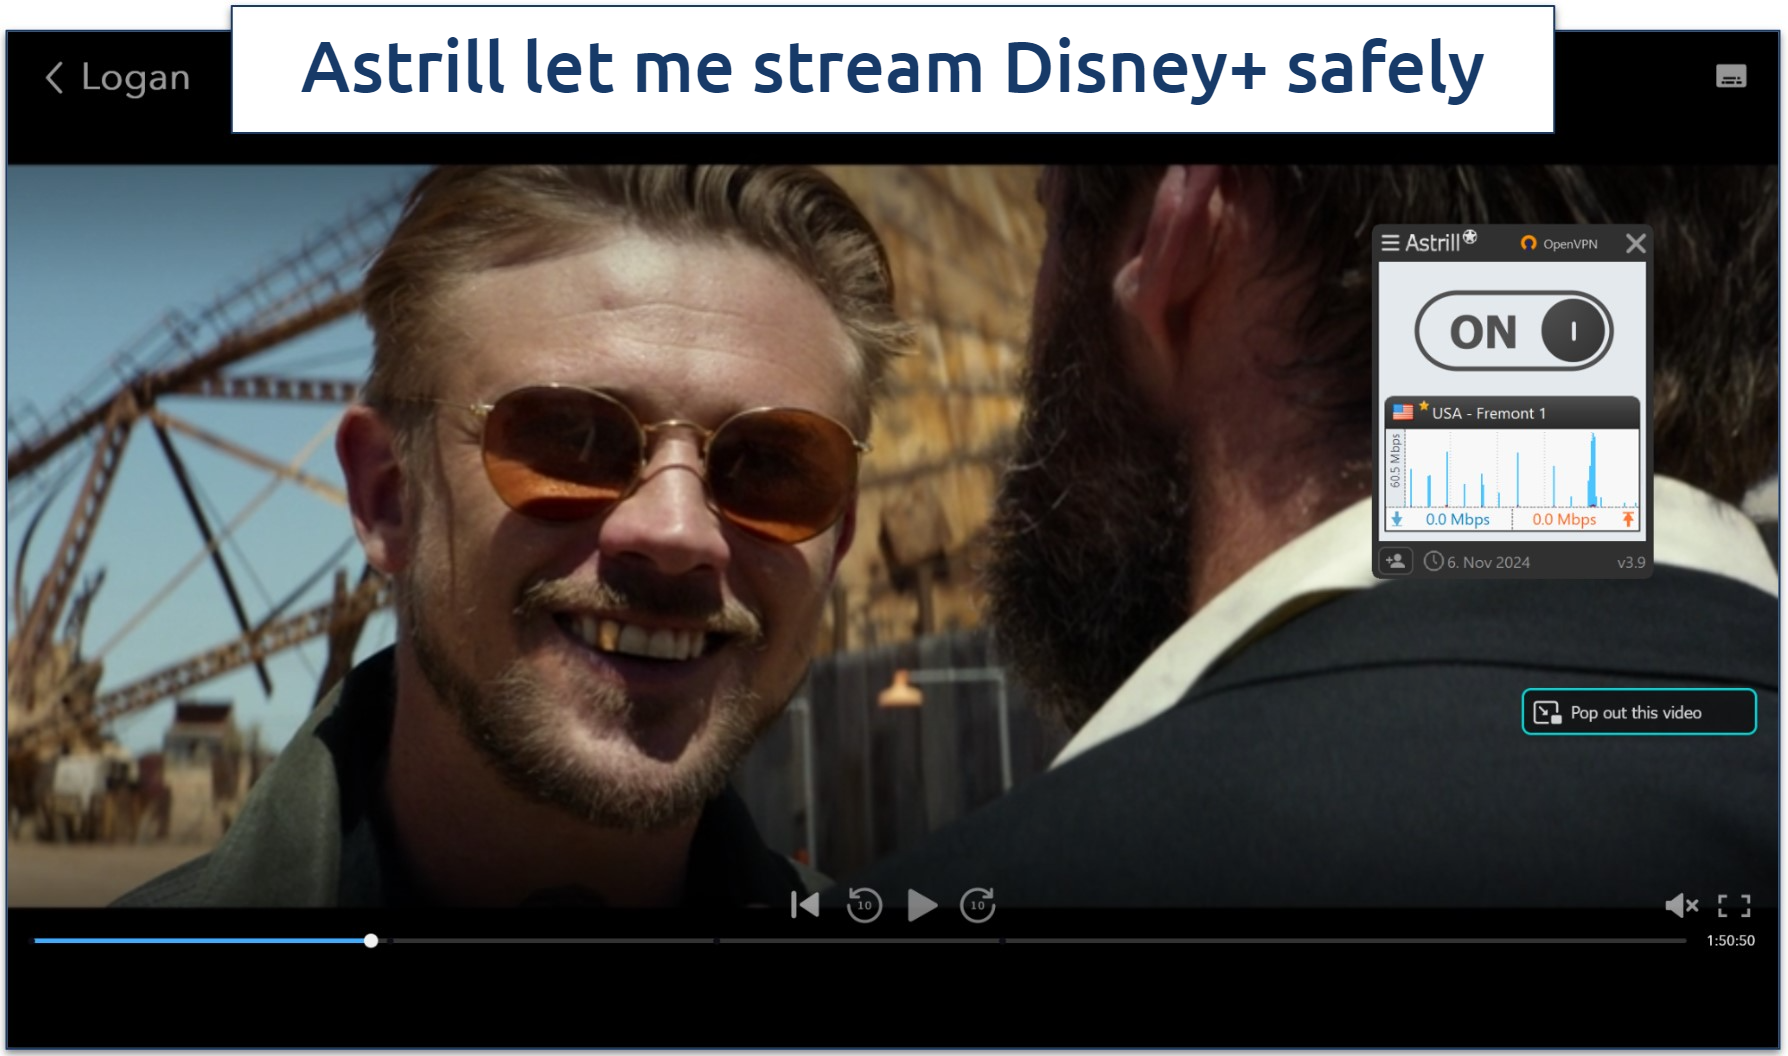 Screenshot of Disney Plus player streaming Logan while connected to Astrill VPN's Fremont 1 server 